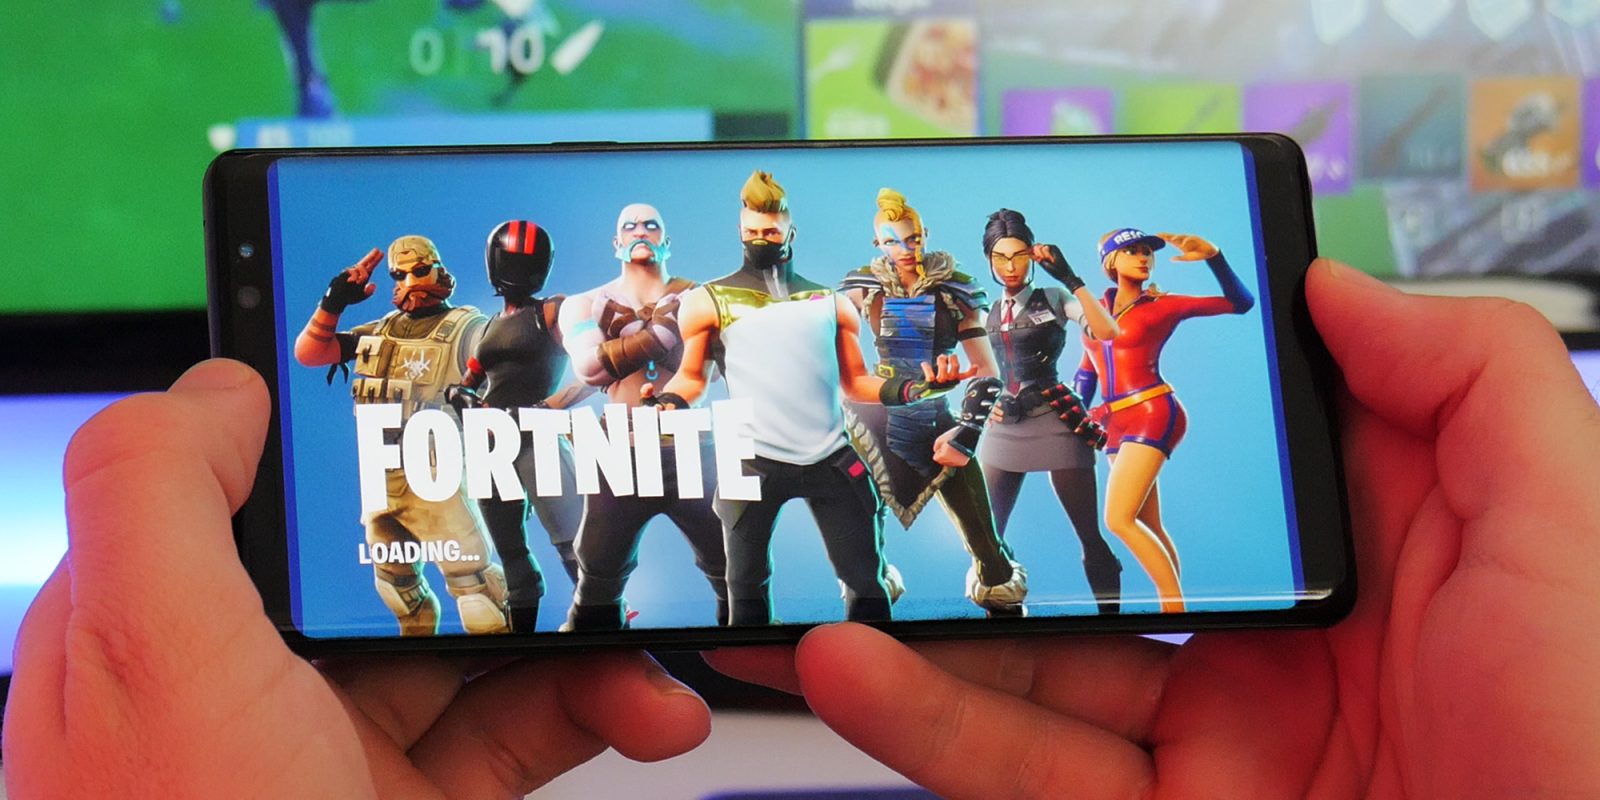 epic games download fortnite android